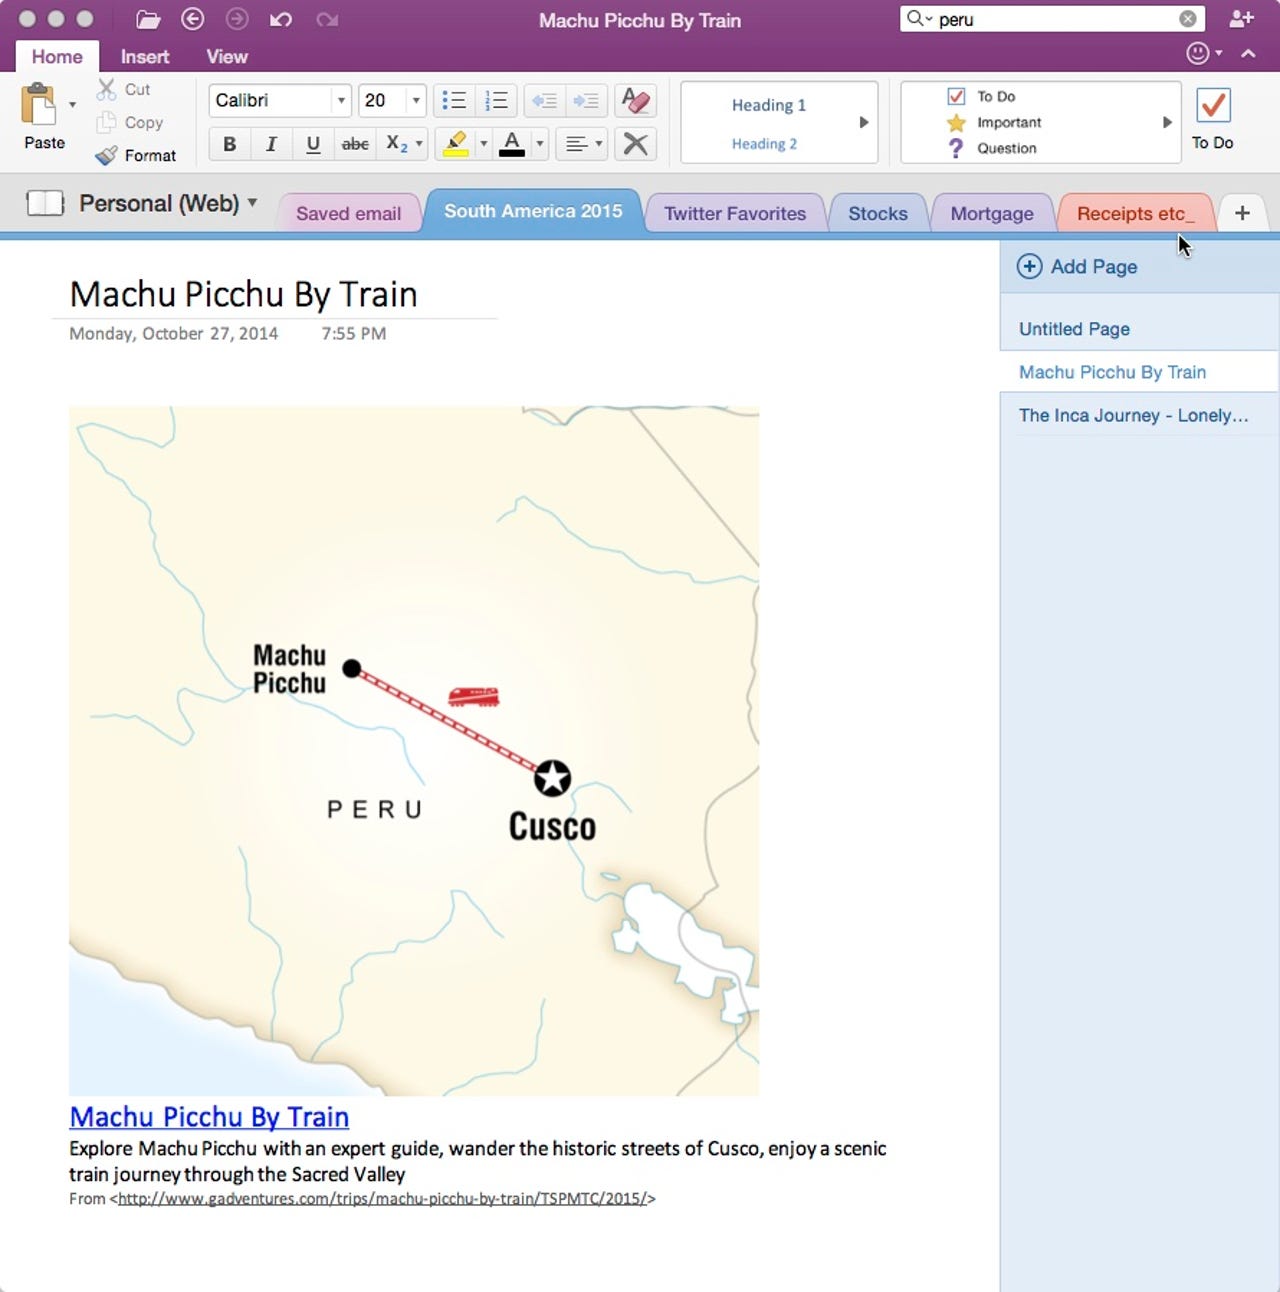 10-office2016-onenote-at-a-glance.jpg